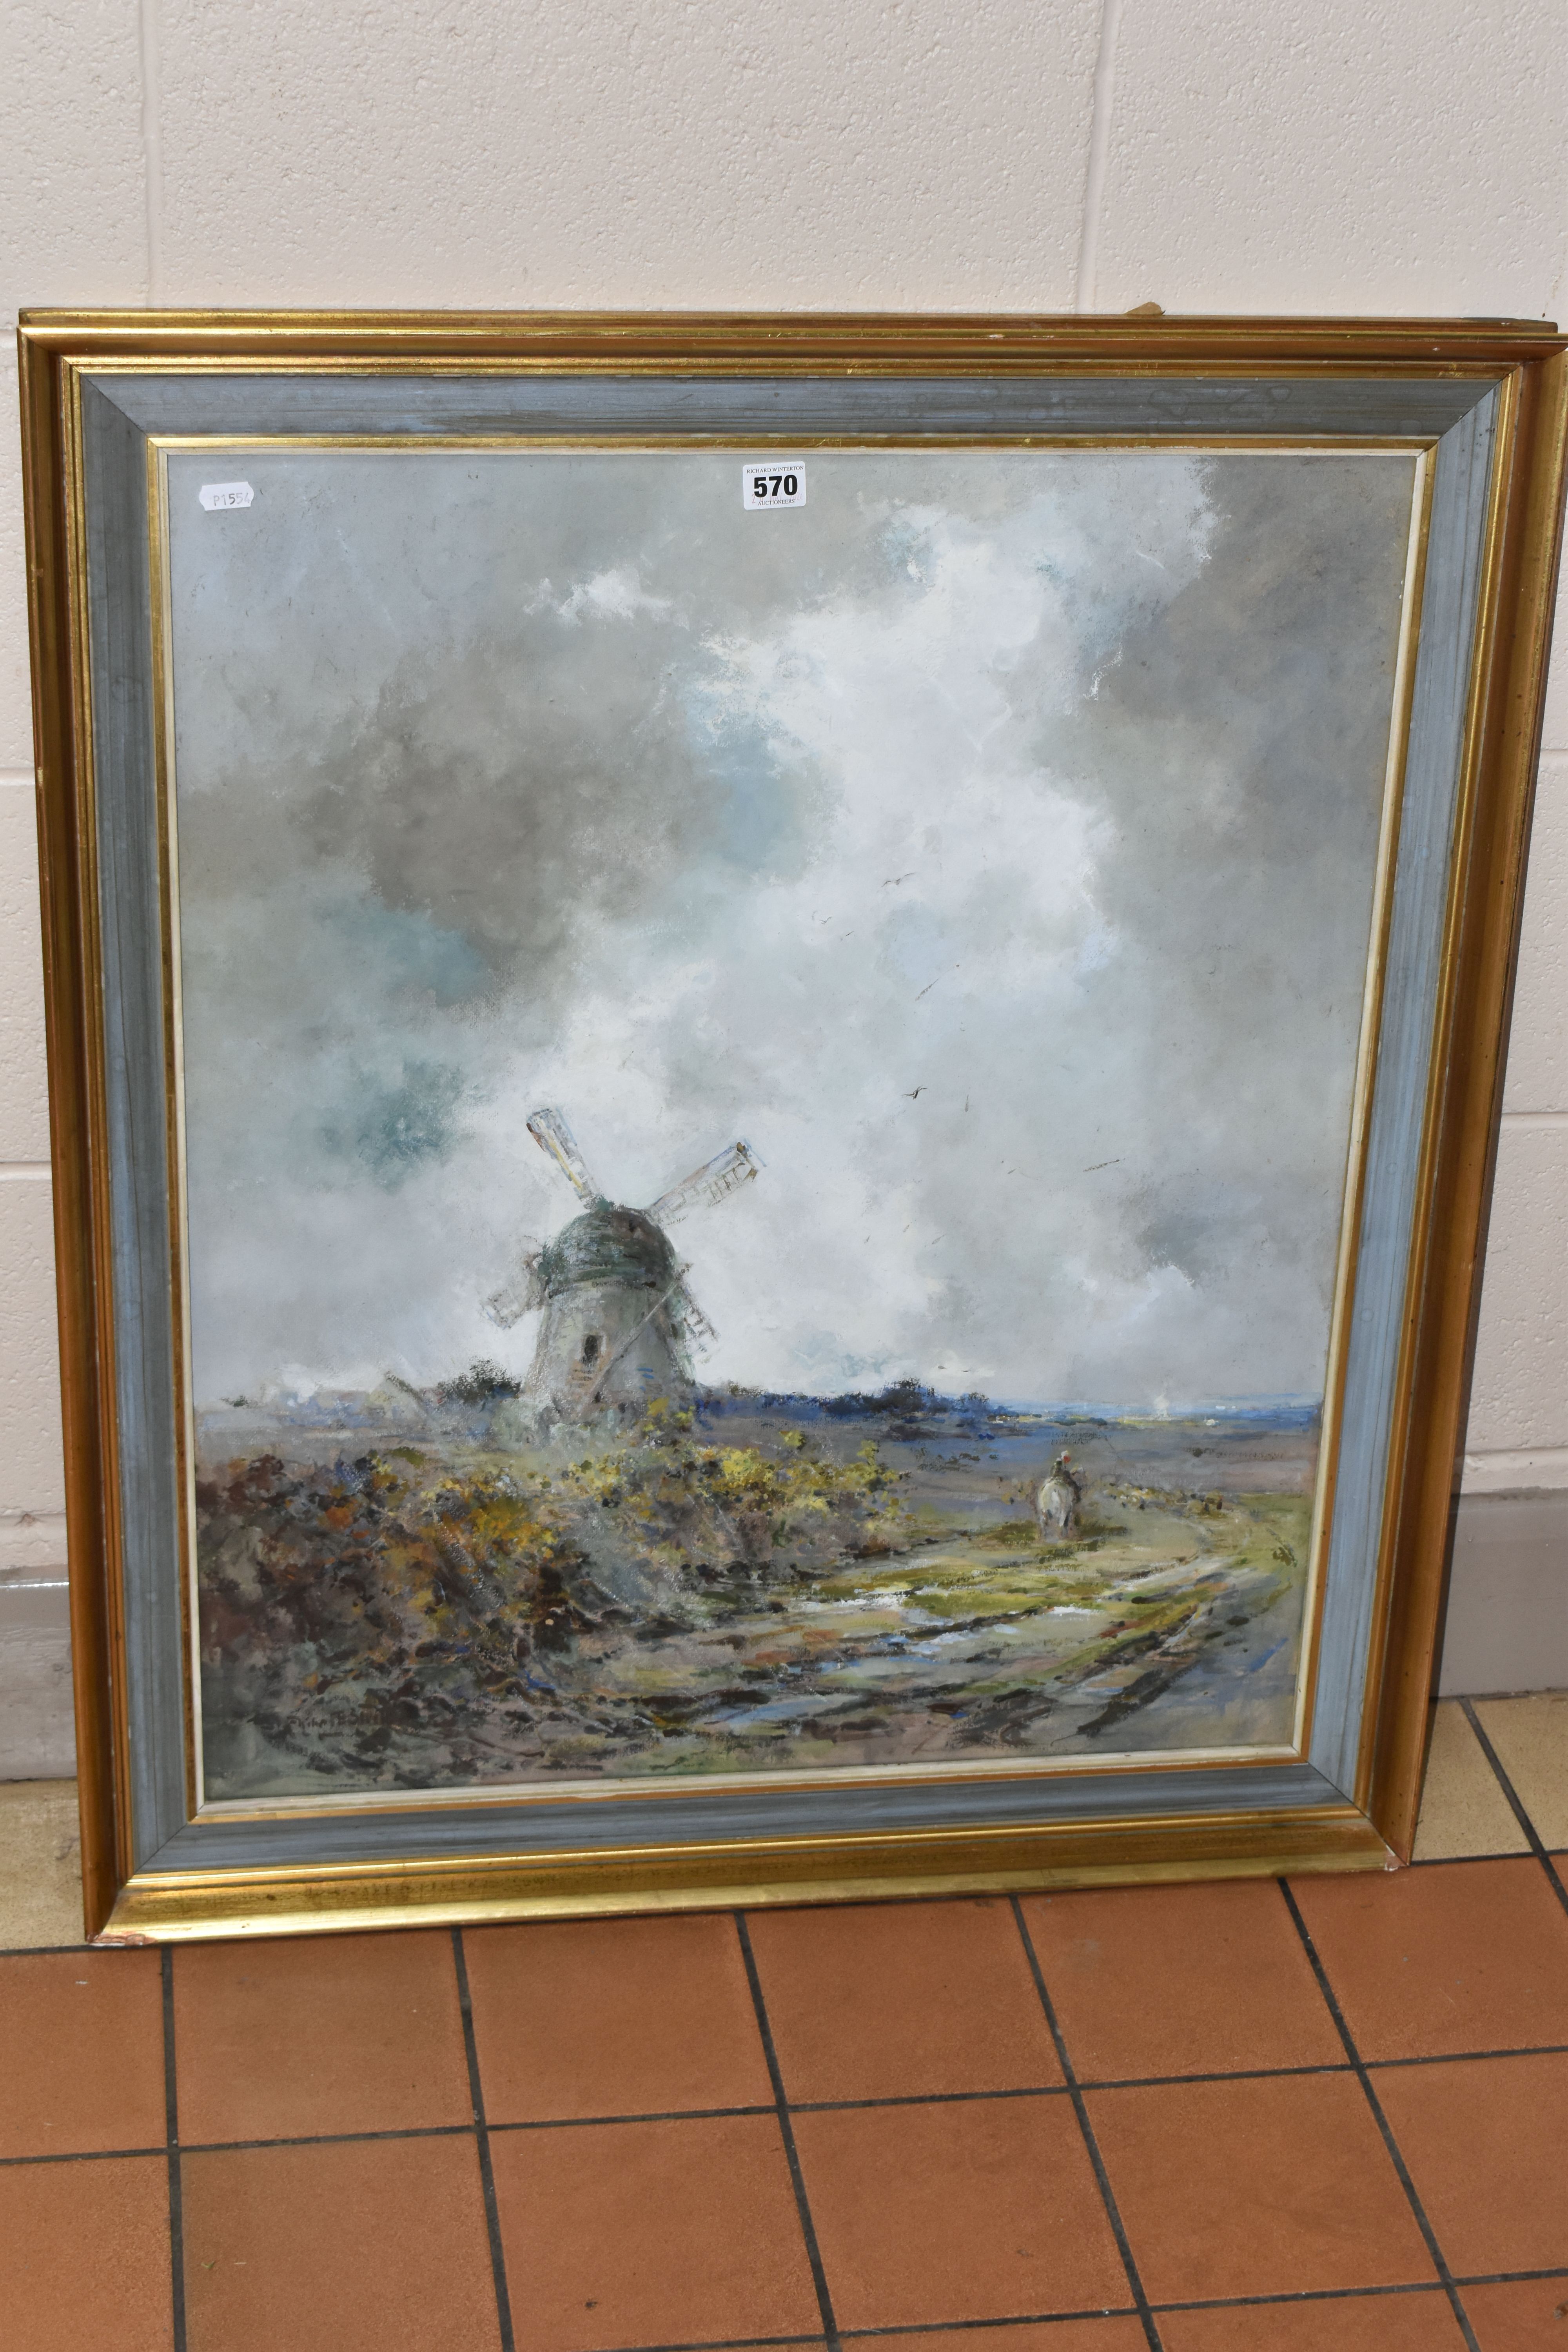 AN EARLY 20TH CENTURY LANDSCAPE WITH WINDMILL, a figure on horseback pass by a windmill in an